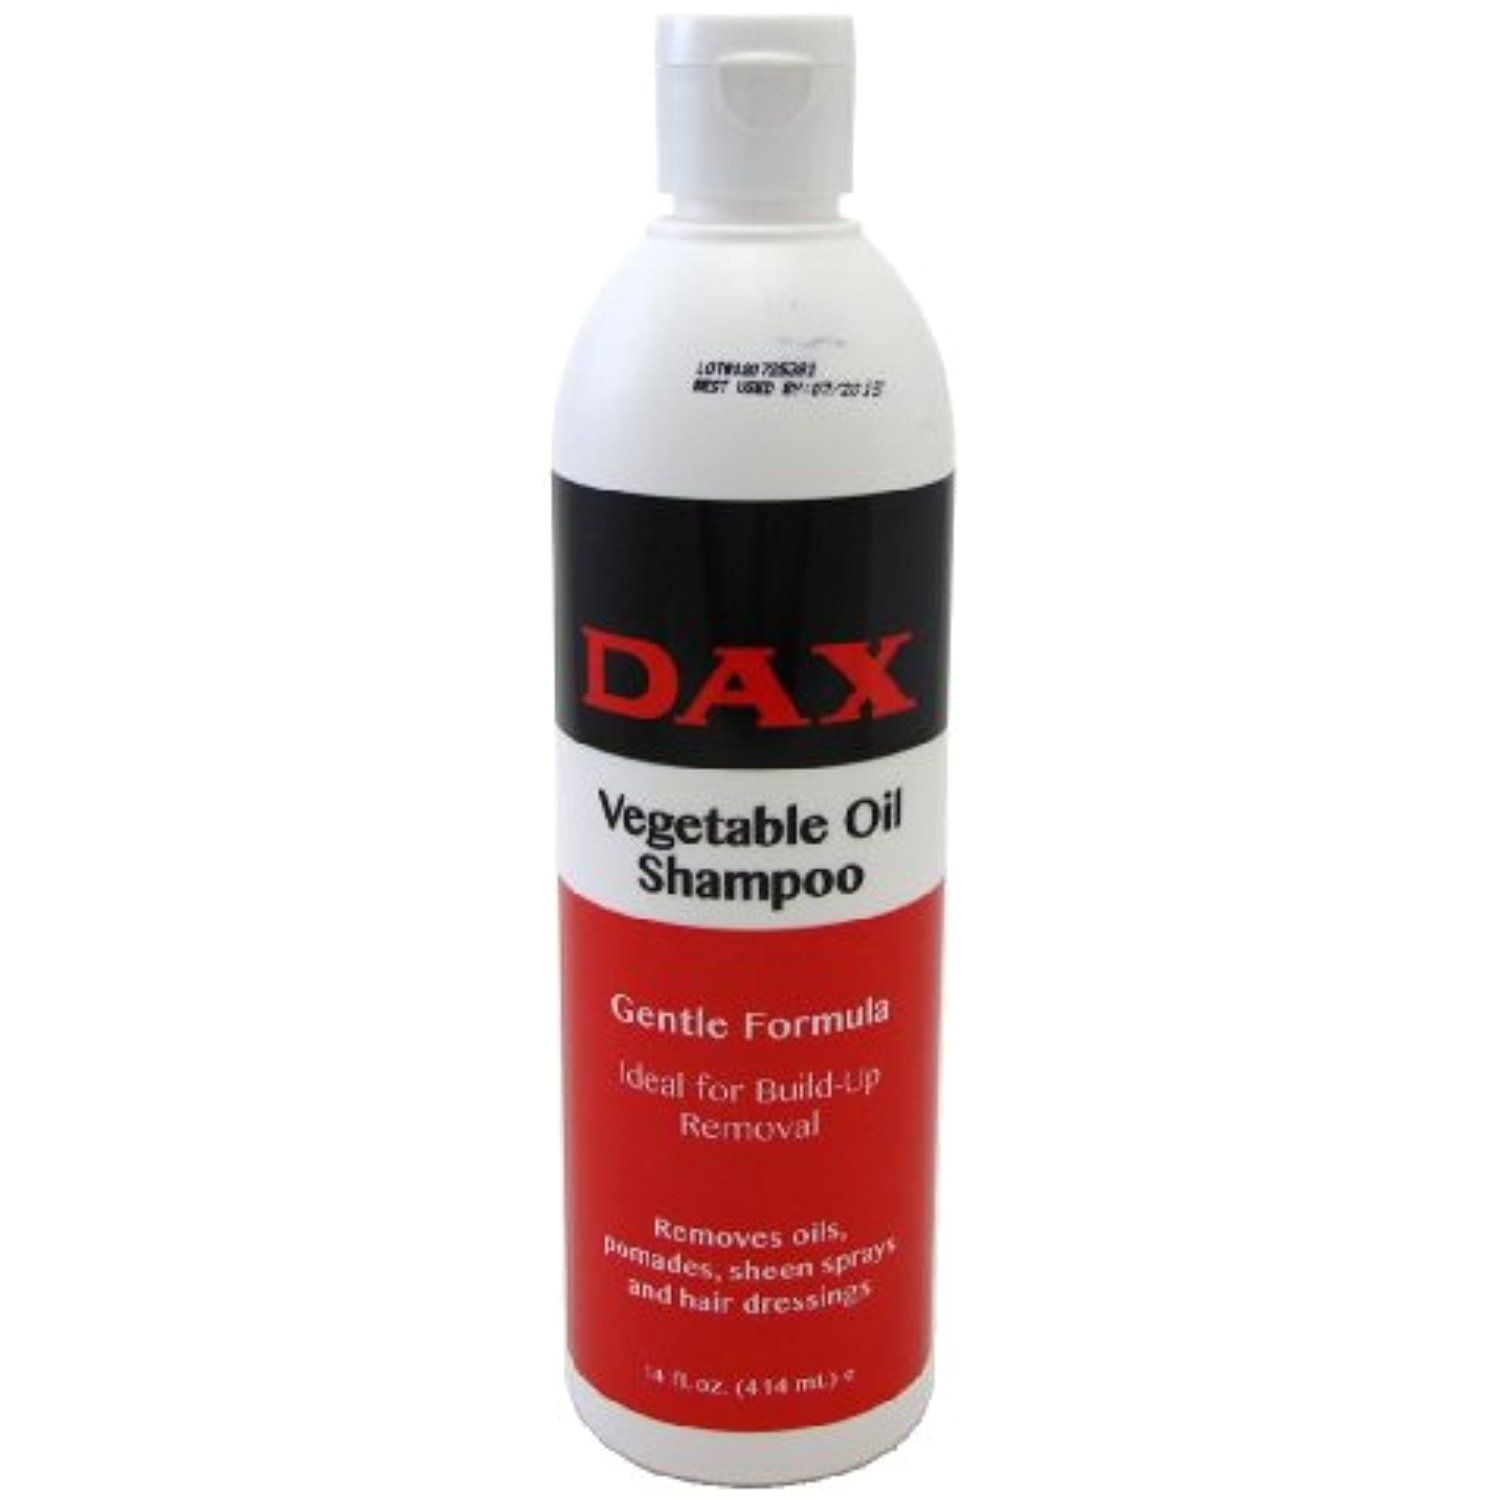 dax shampoo vegetable oil 12 oz 3 pack with free nail file read more at the image link this is an affiliate link haircare